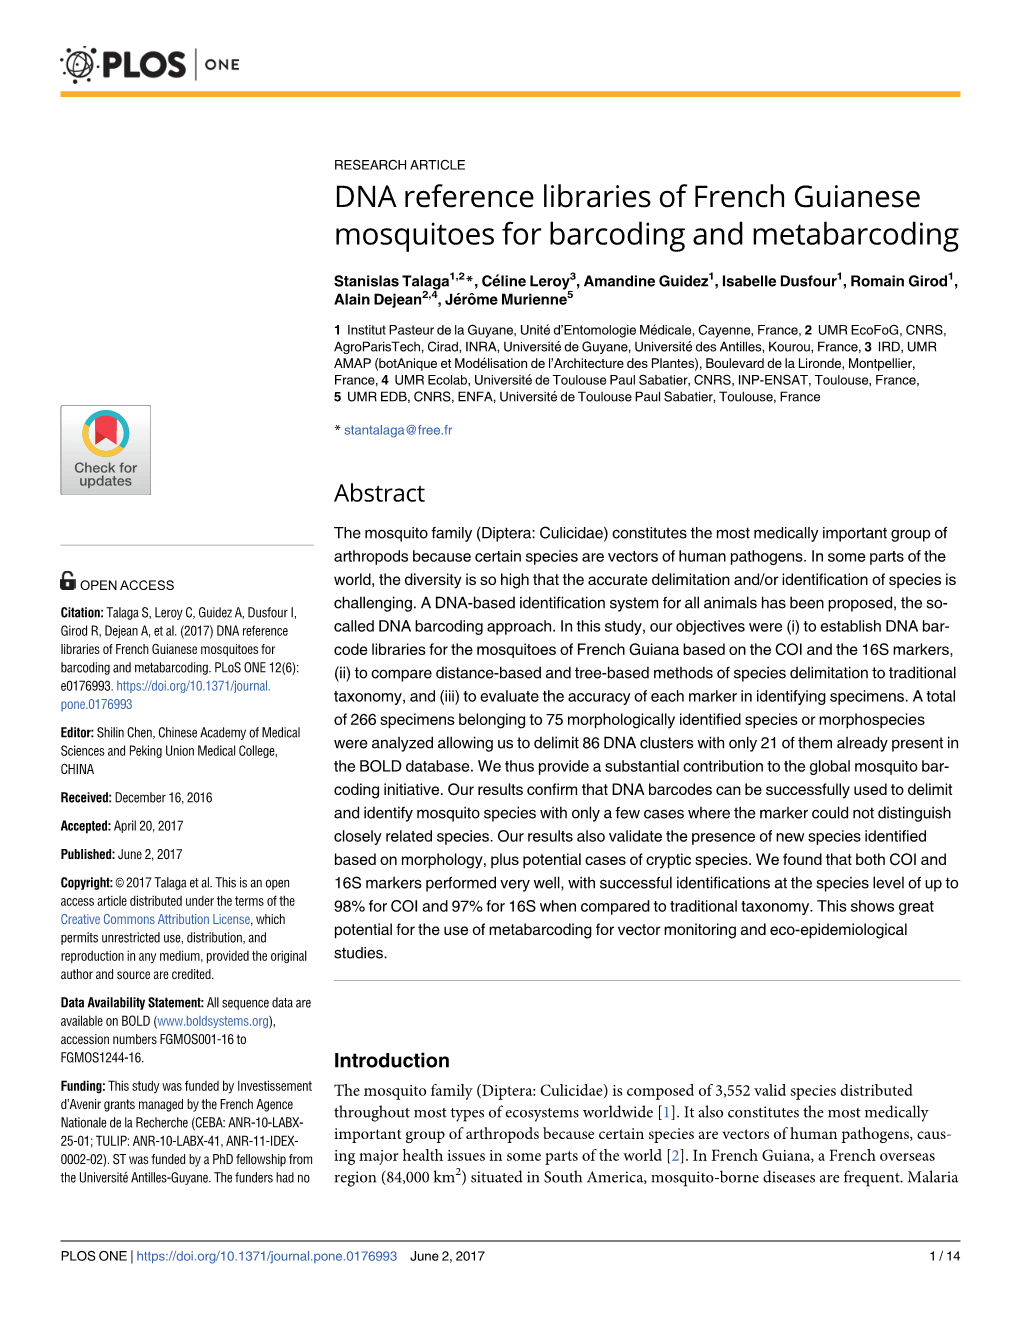 DNA Reference Libraries of French Guianese Mosquitoes for Barcoding and Metabarcoding